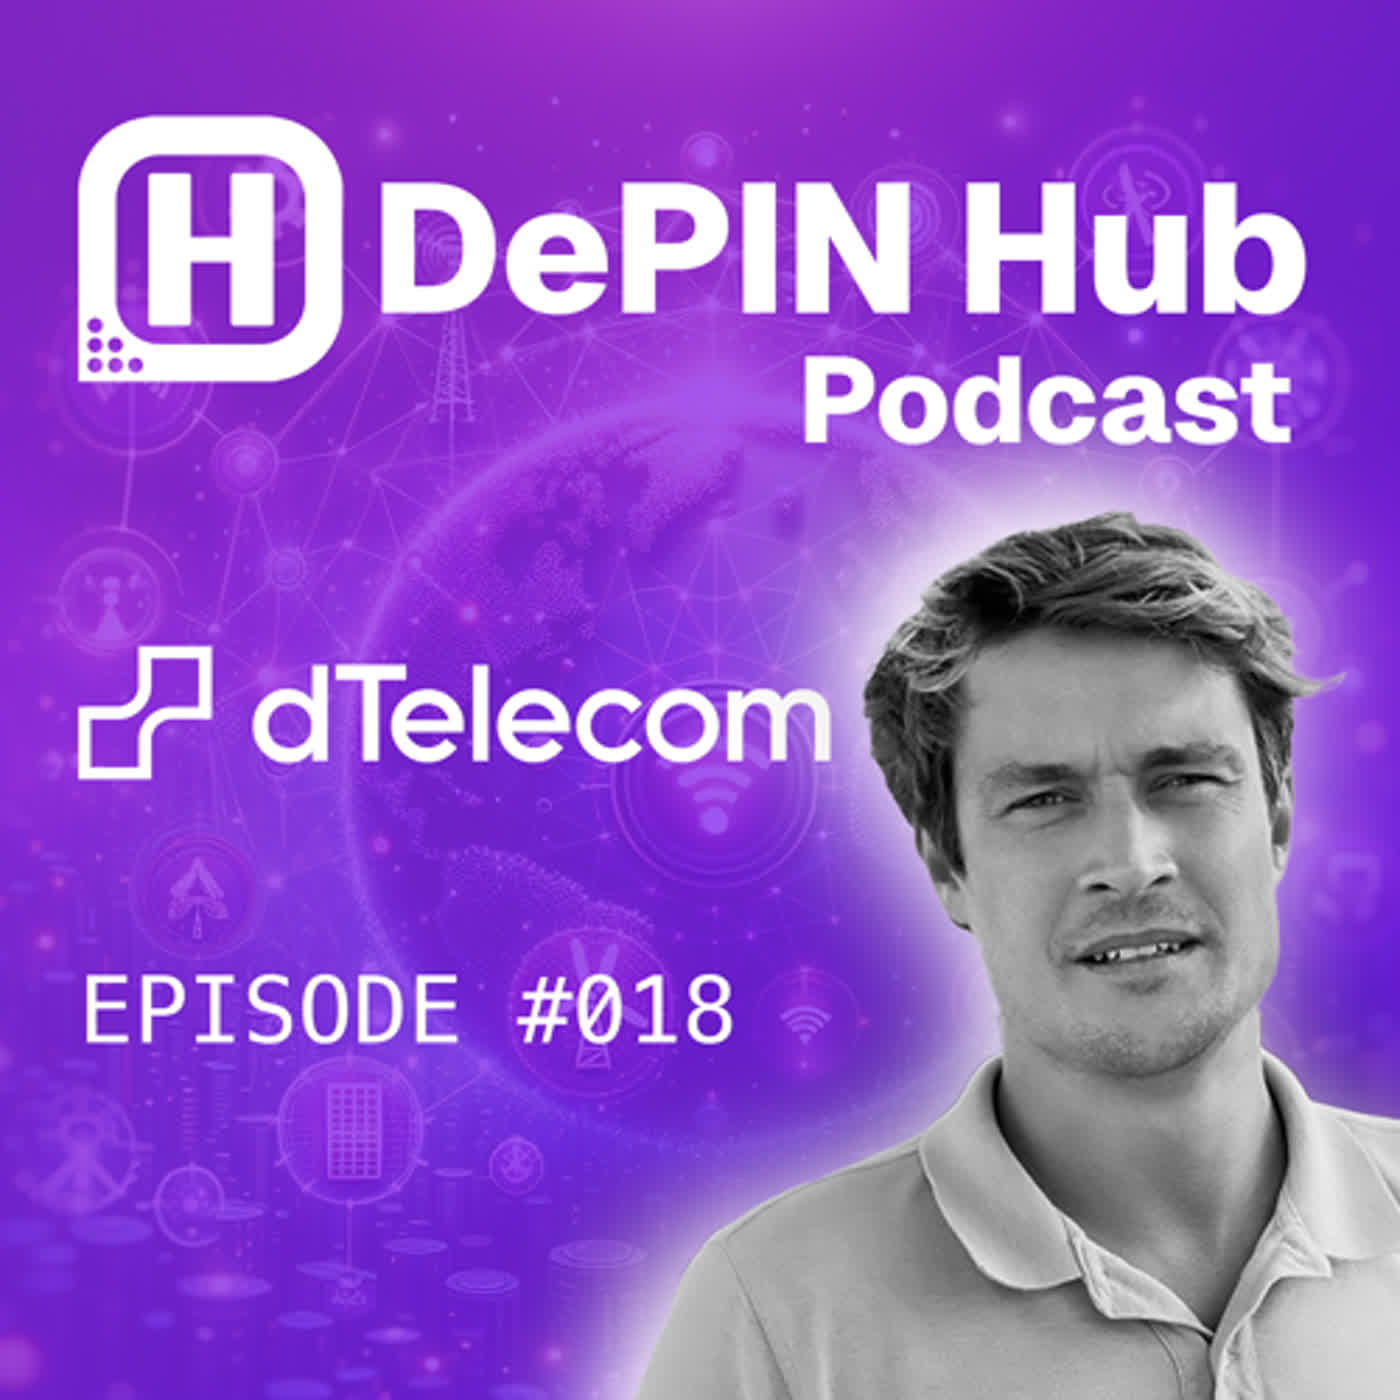 #018 - dTelecom - A global P2P network for real-time communication (RTC) powered by DePIN